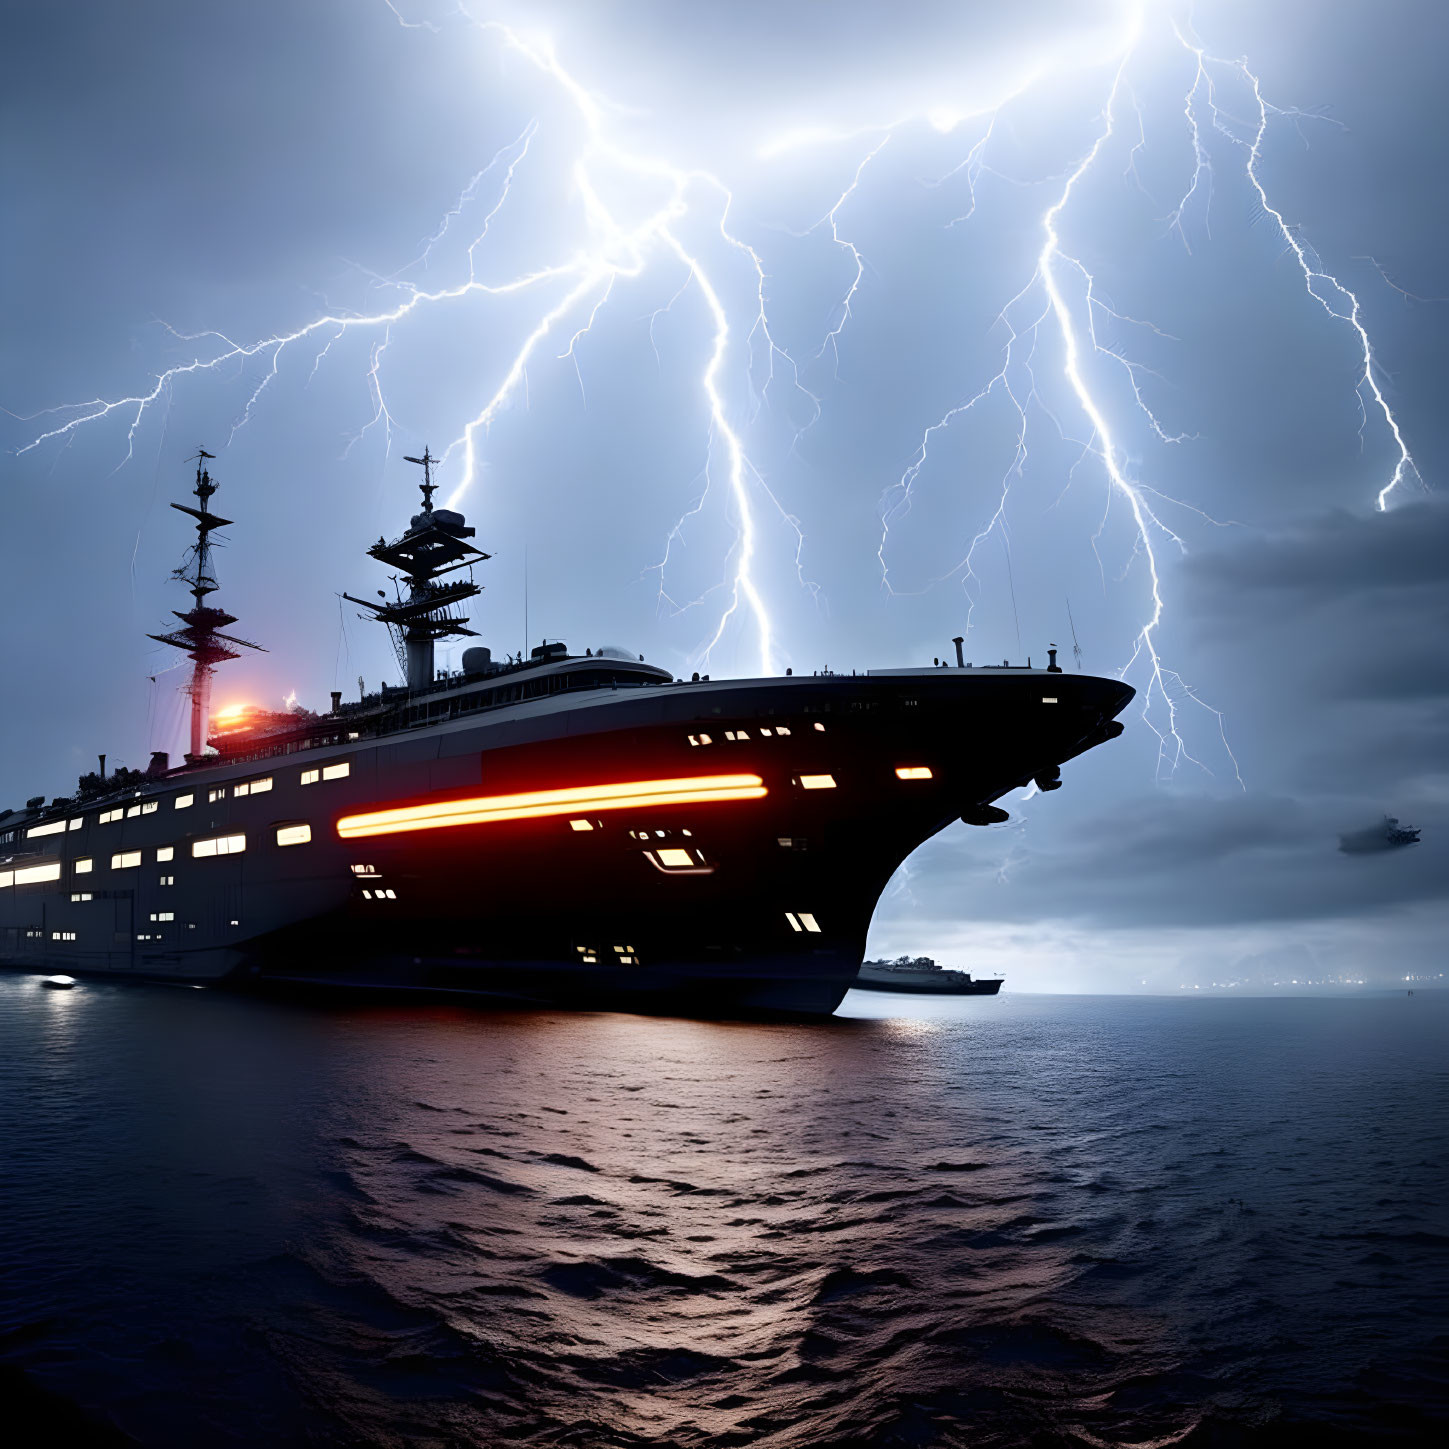 cyber ship in a storm